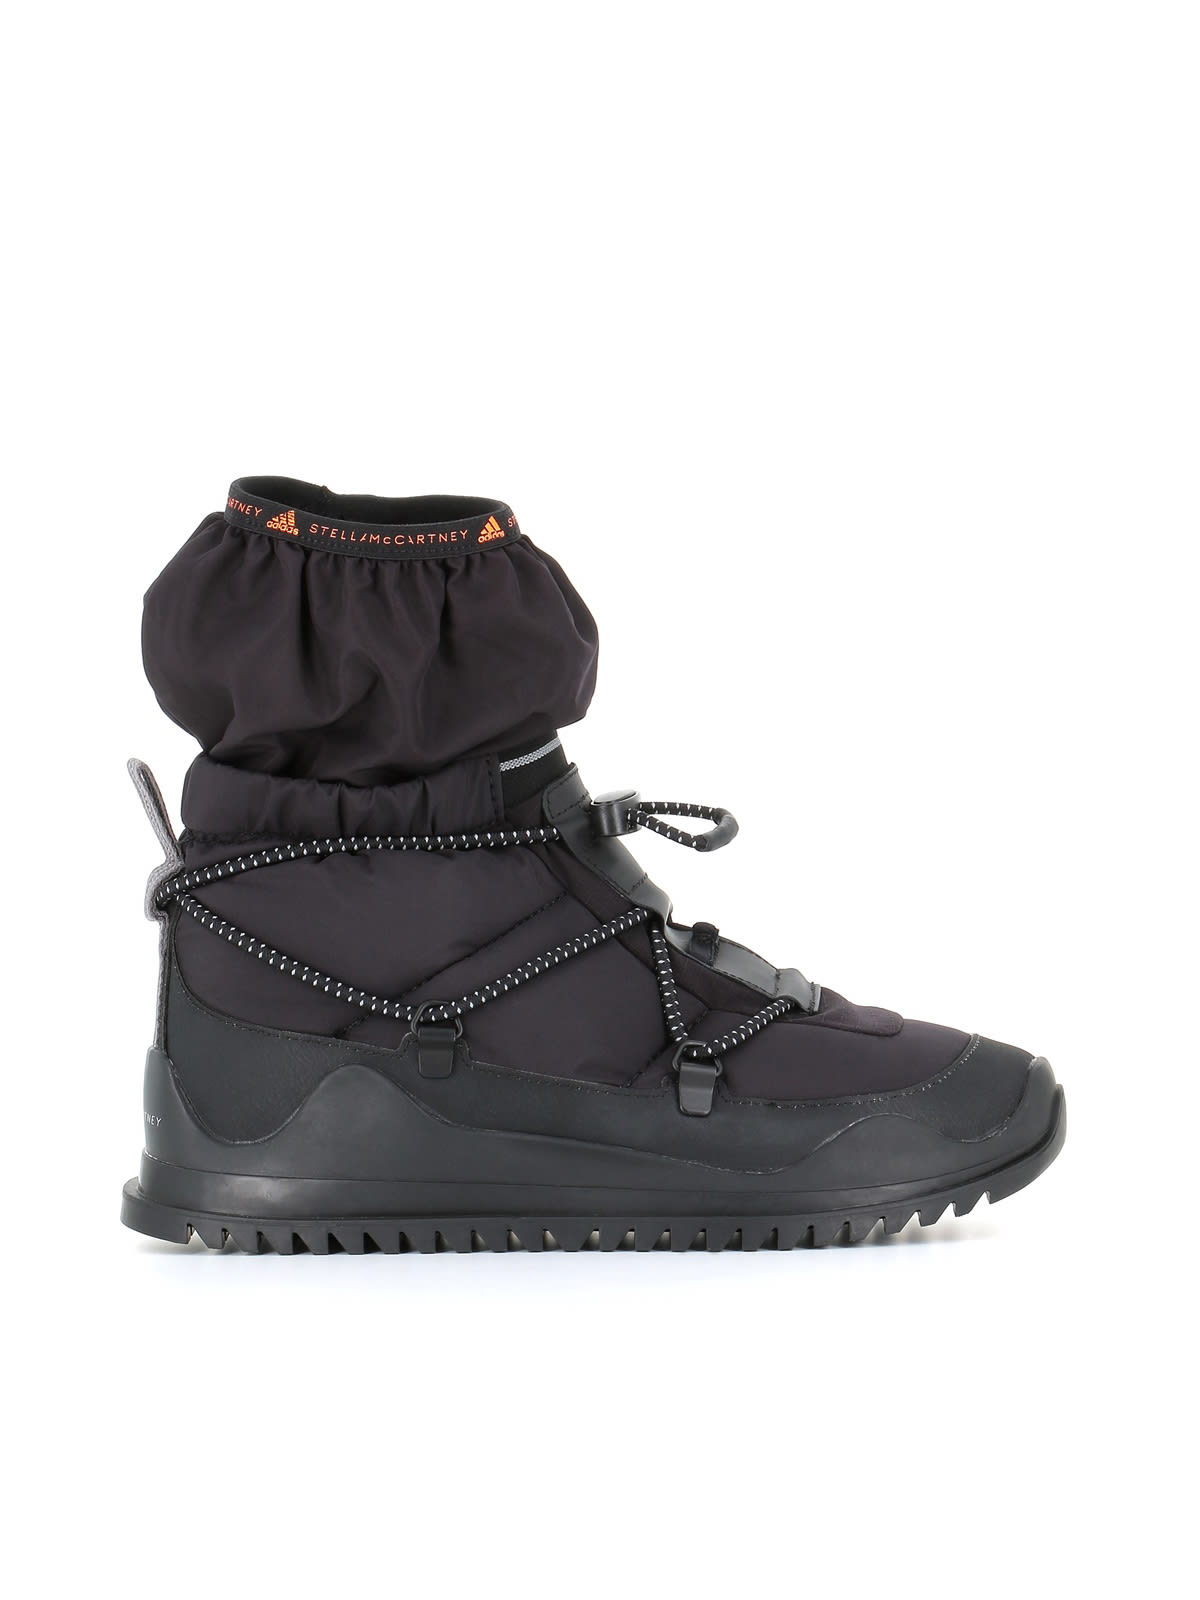 Adidas by Stella McCartney Ankle Boot Winter Boot